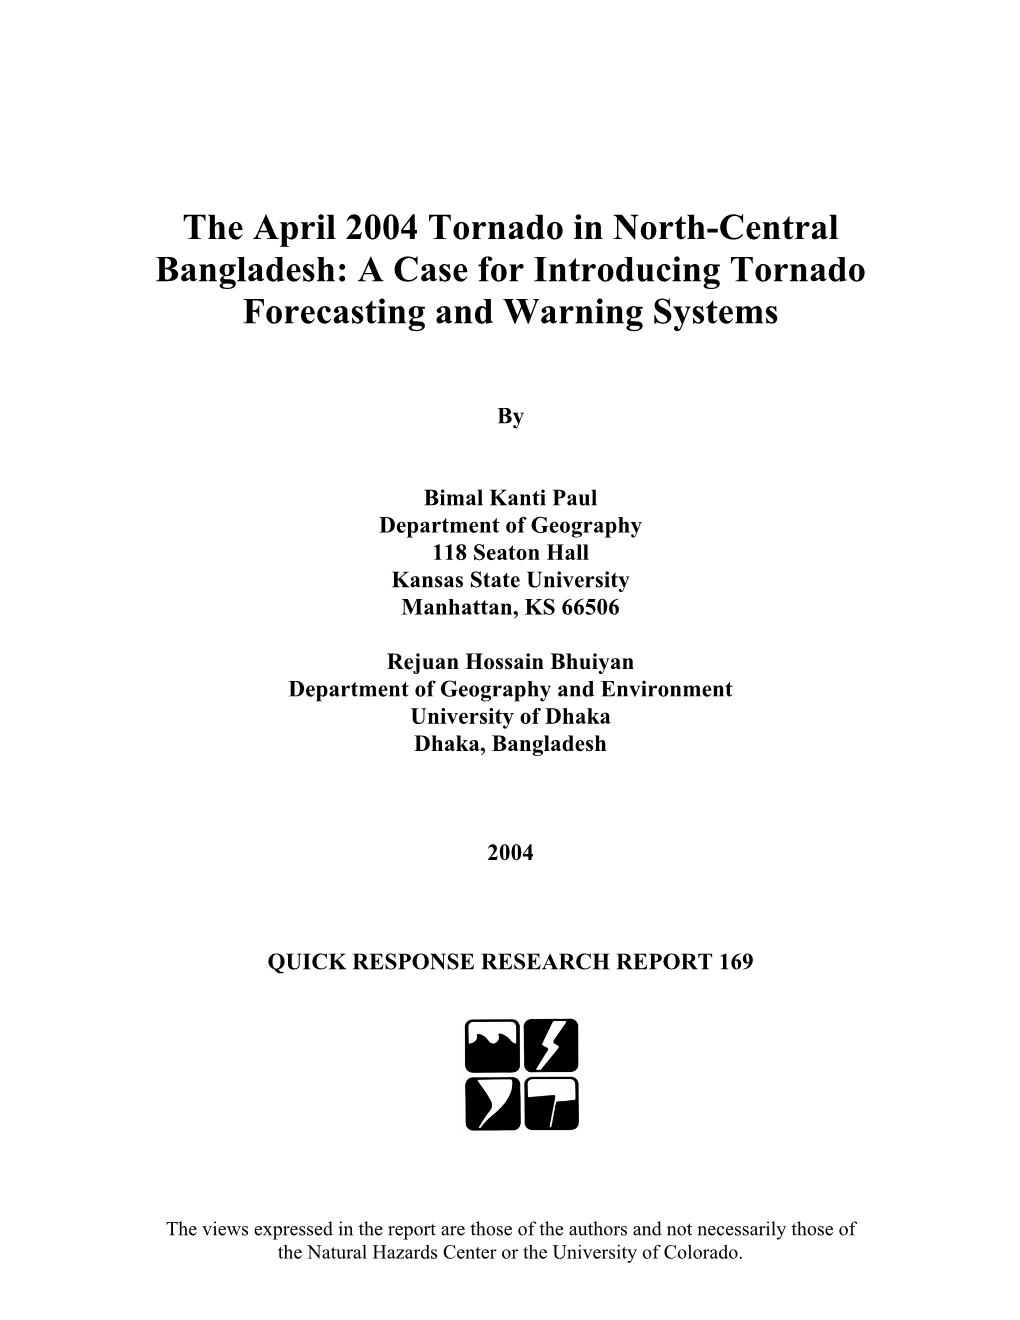 The April 2004 Tornado in North-Central Bangladesh: a Case for Introducing Tornado Forecasting and Warning Systems